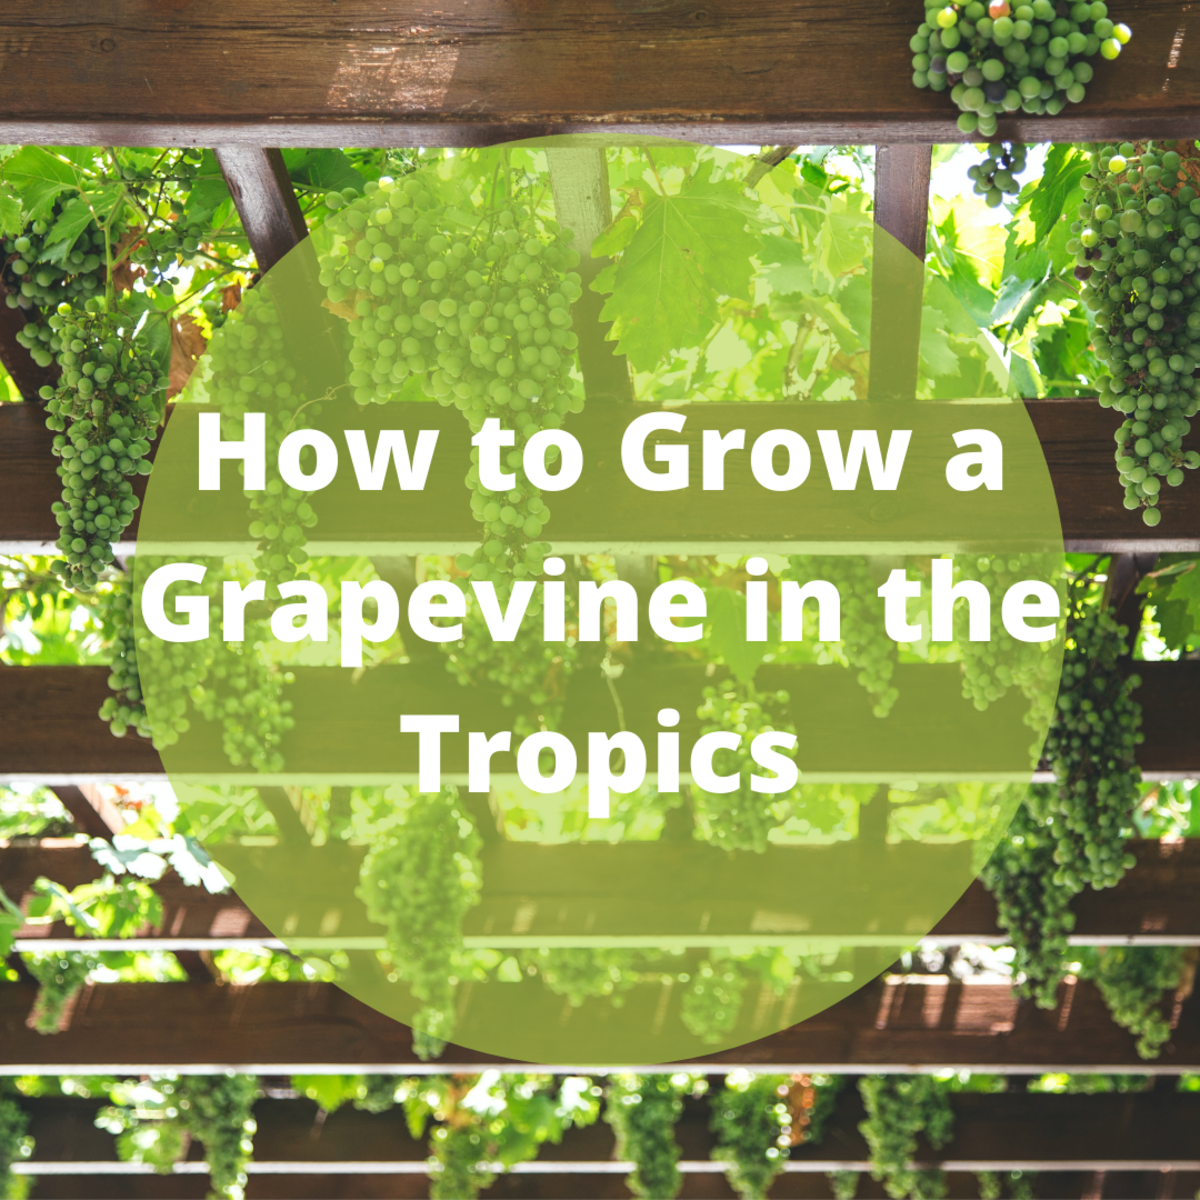 How to Grow Grapes in a Tropical Climate